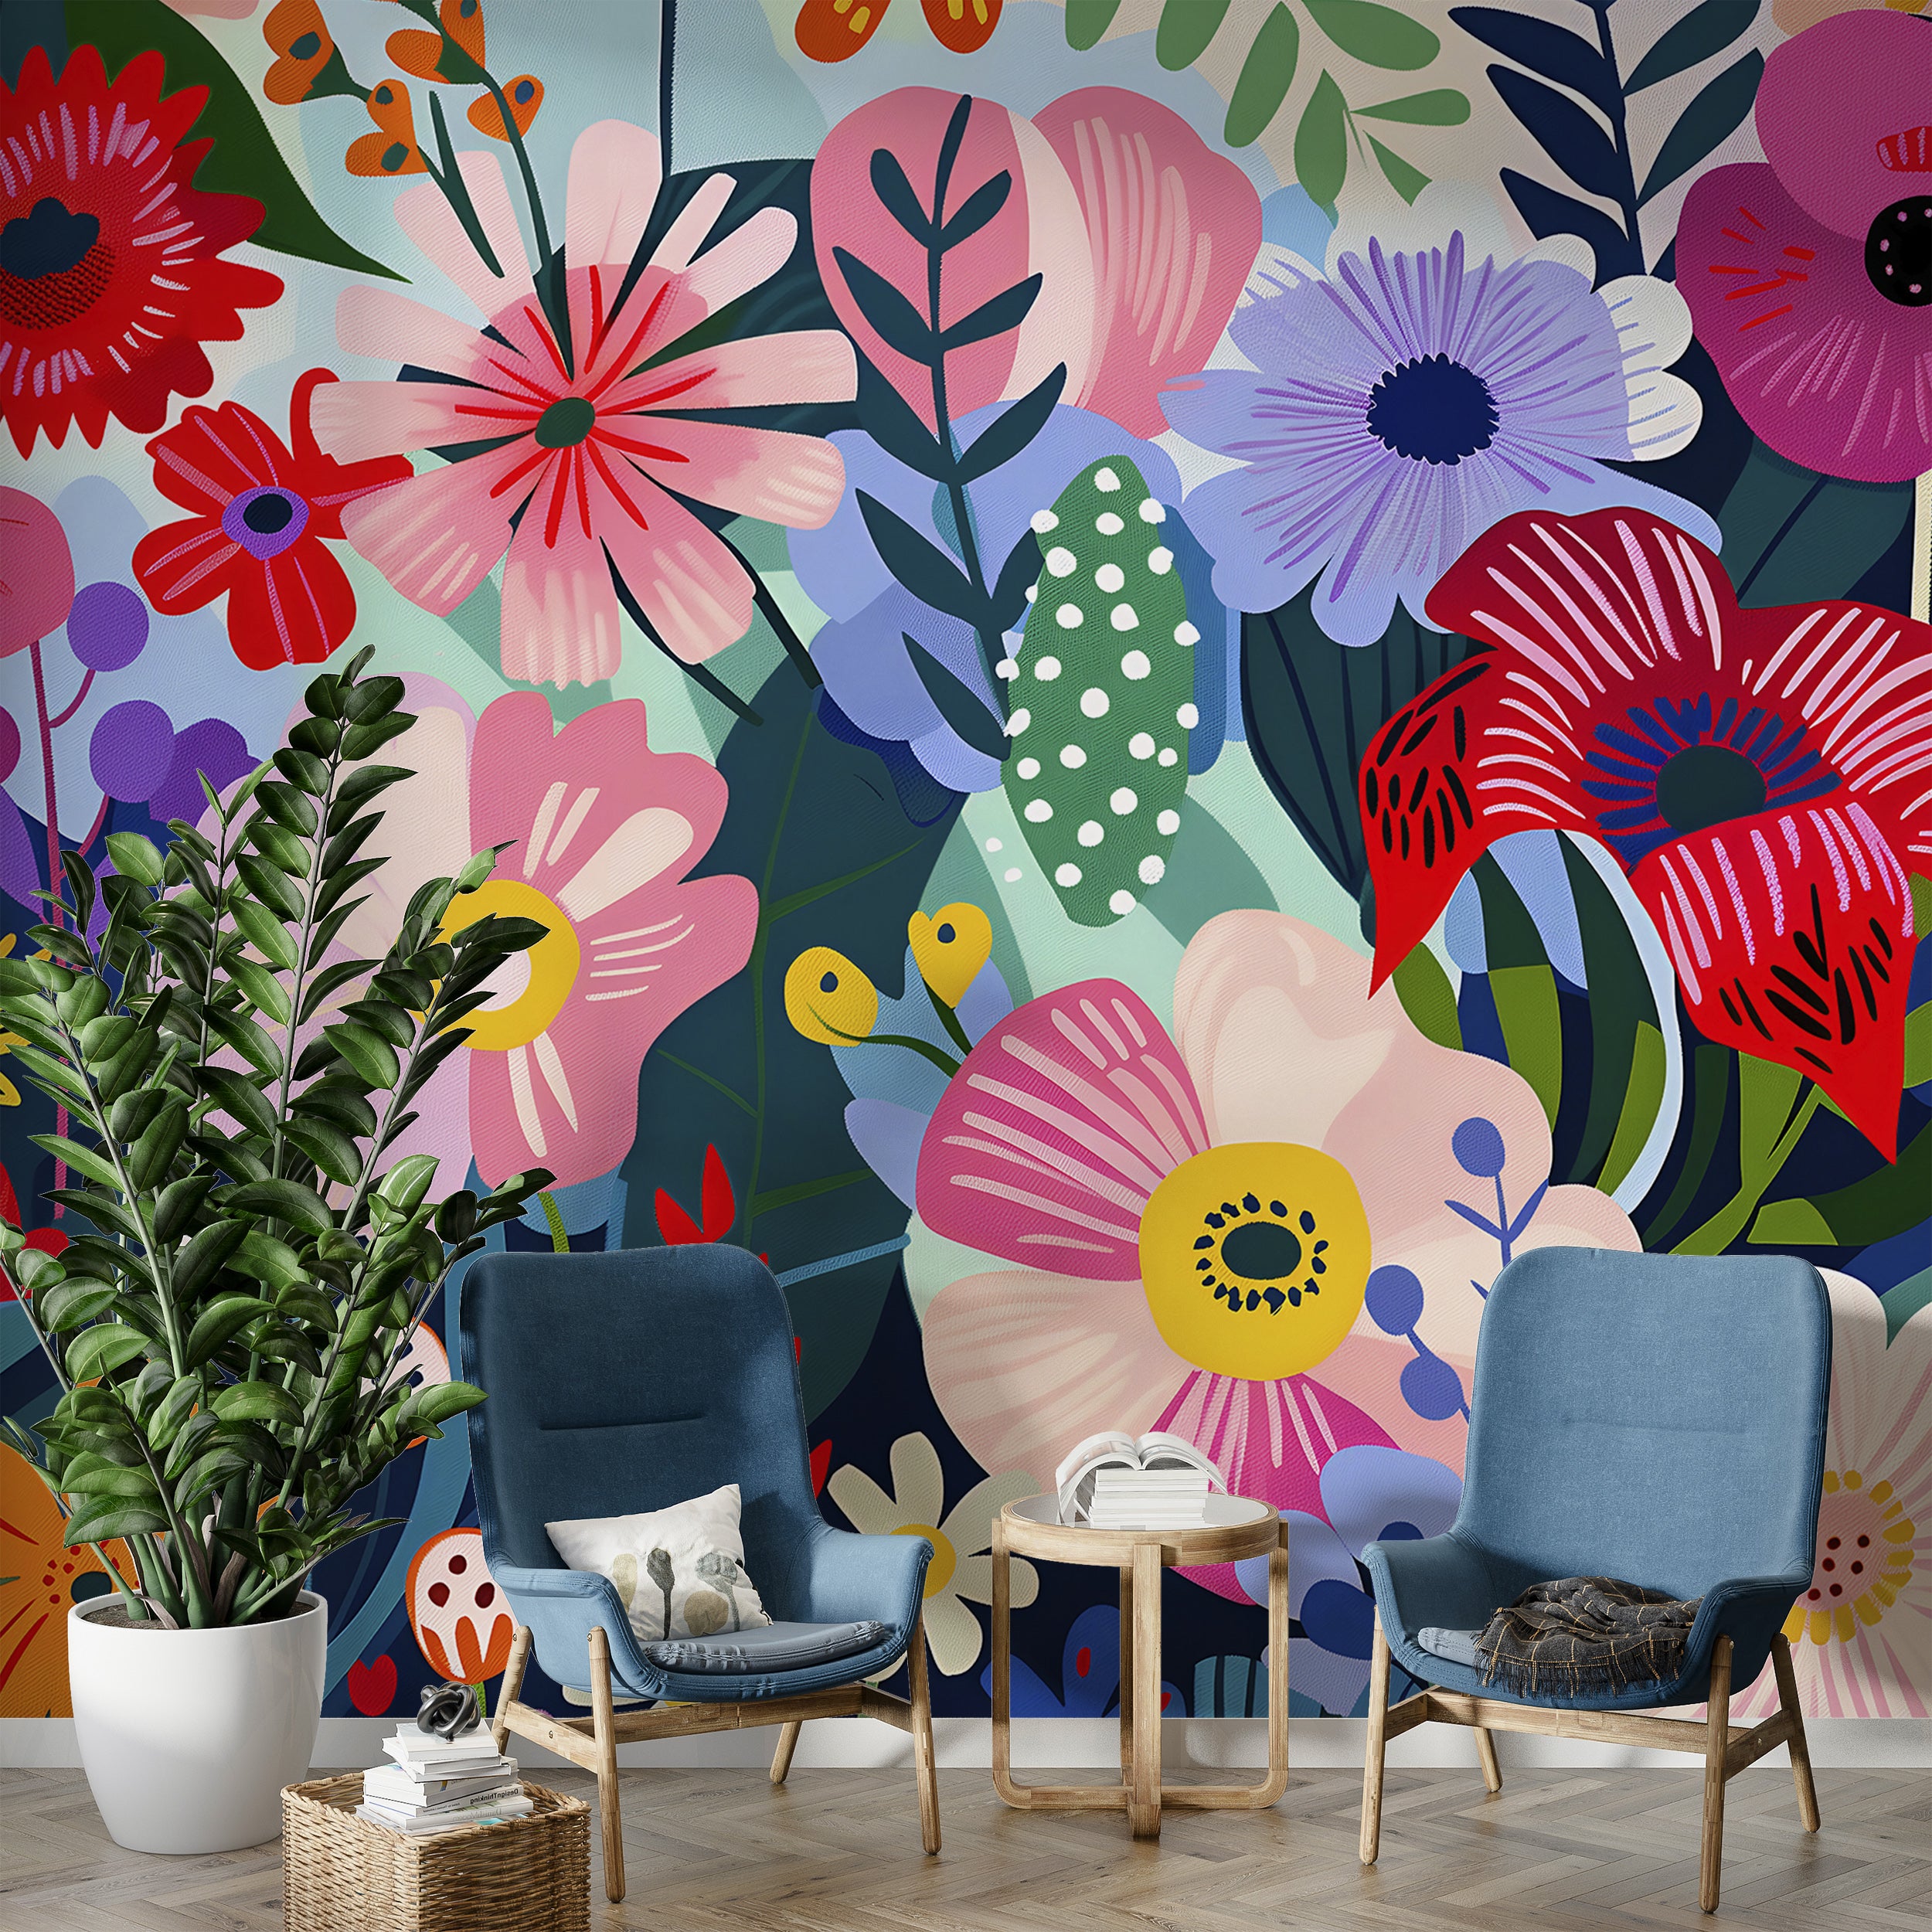 Colorful Abstract Flowers Wallpaper, Peel and Stick Modern Floral Mural, Large Wild Flowers Wall Decor, Removable Meadow Flowers Art